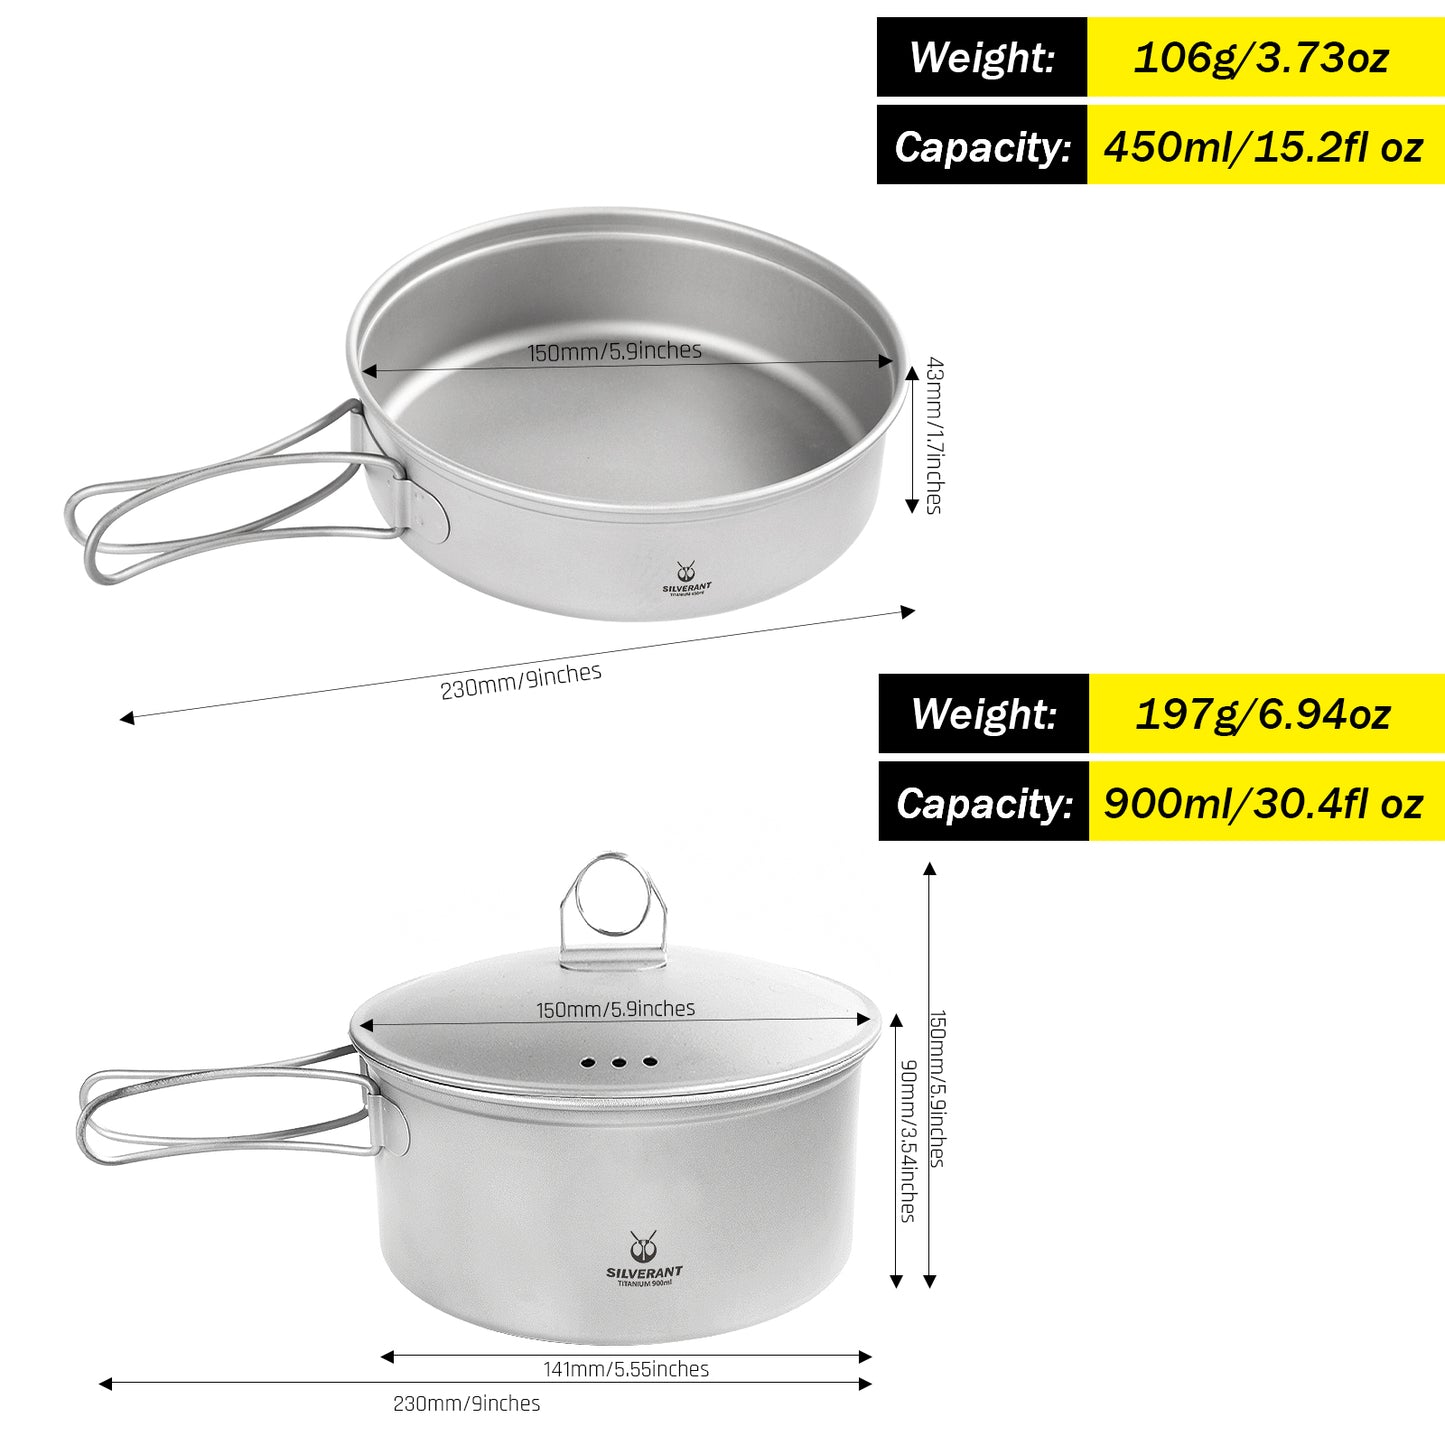 Ultralight 2-Piece Titanium Cookware Set - dimension and weight image